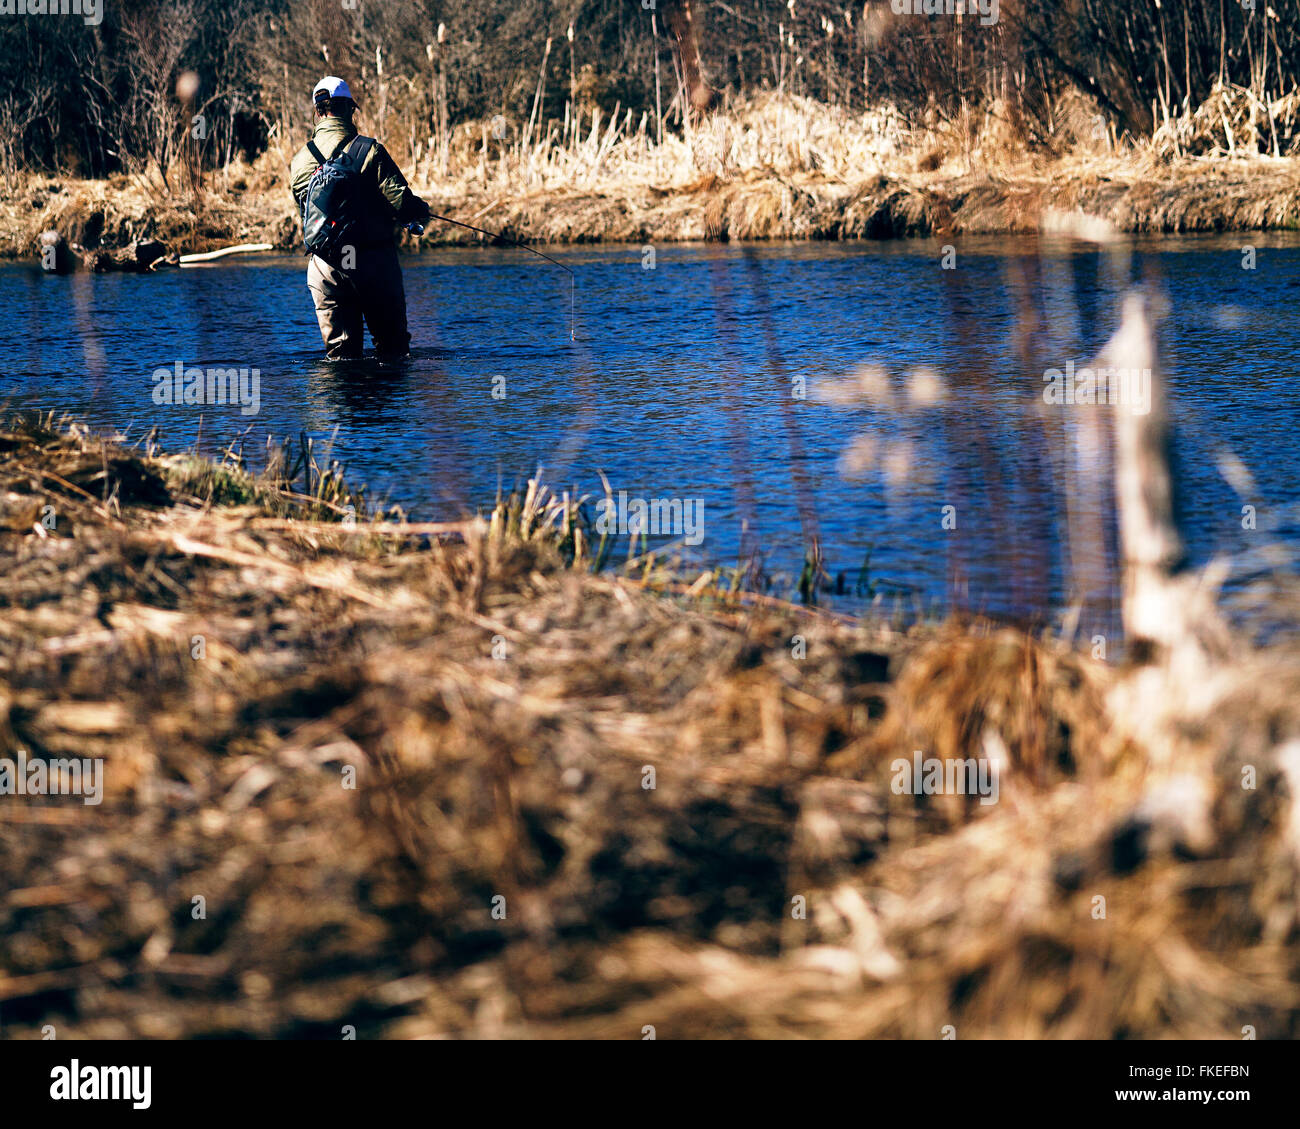 Fly fisherman wading on a small river Stock Photo